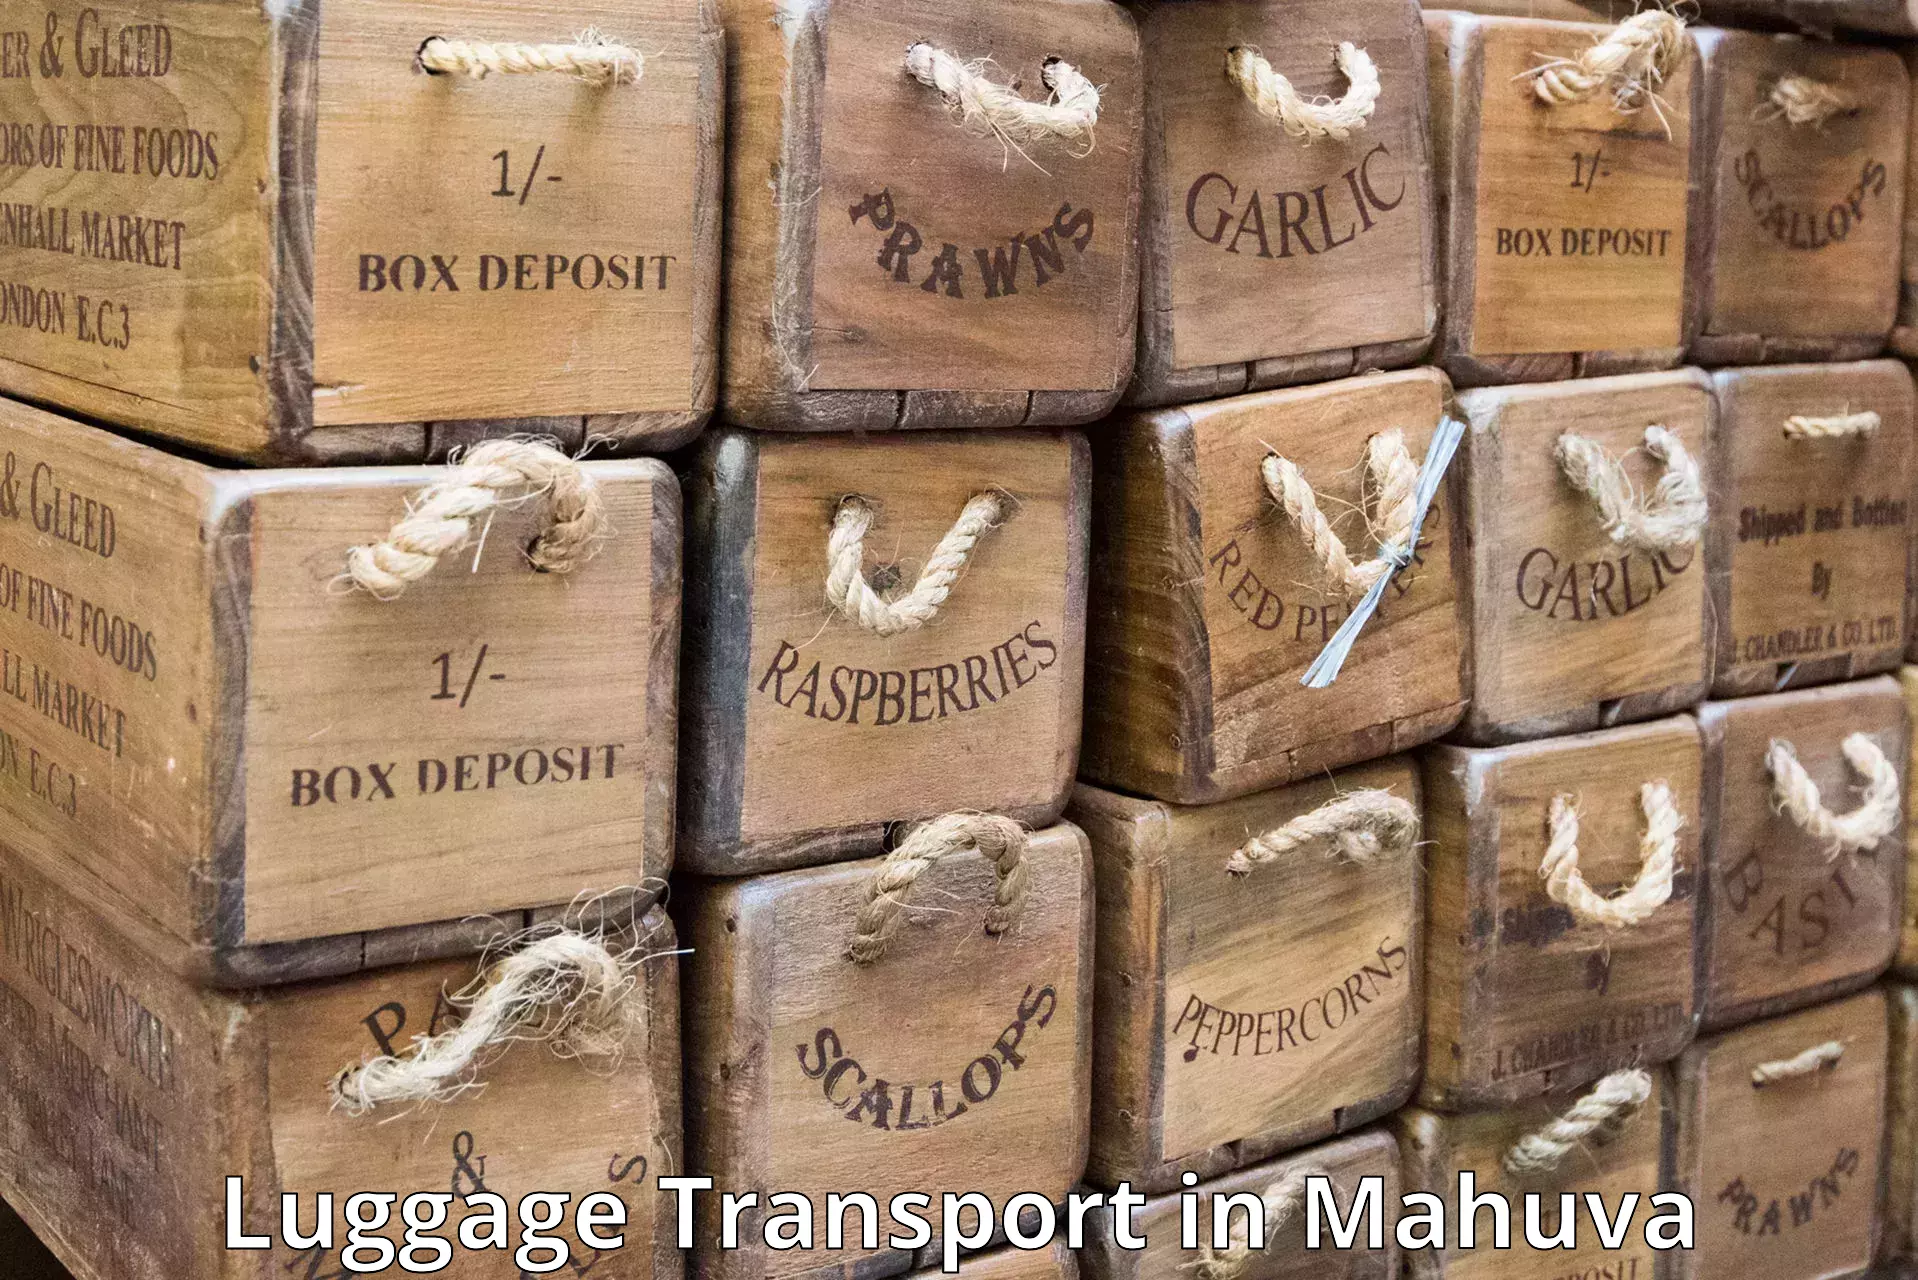 Luggage transport consulting in Mahuva